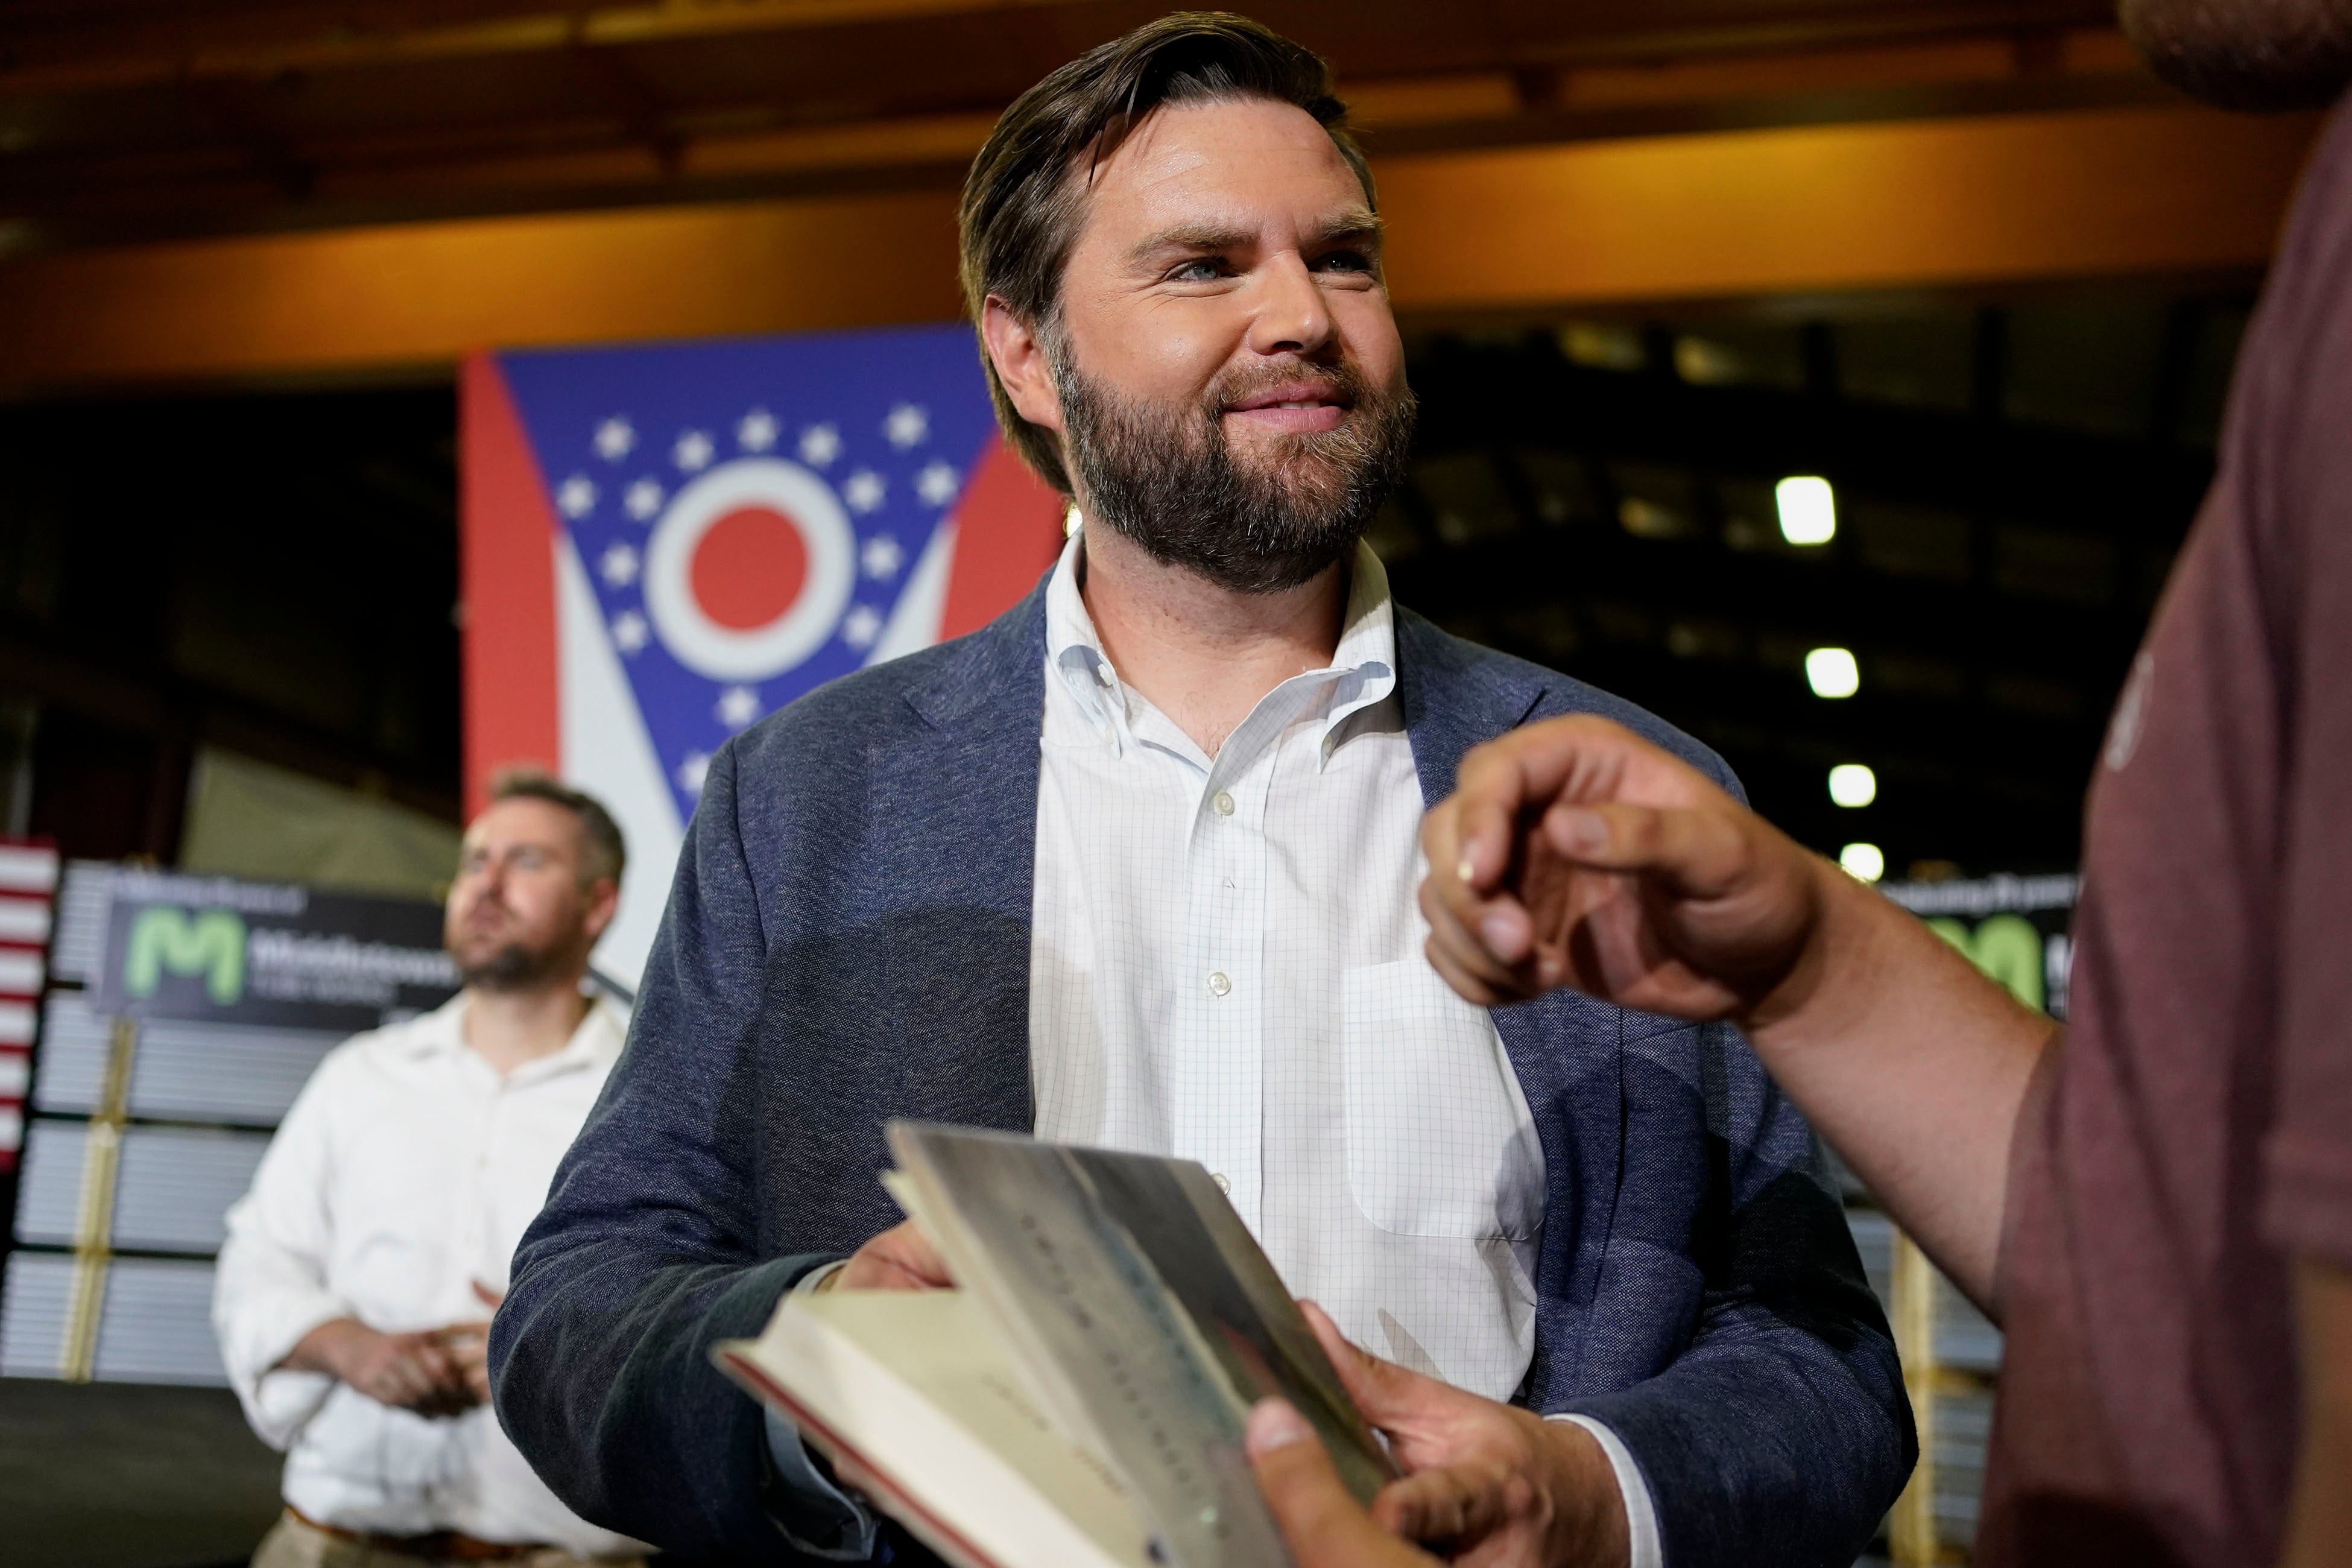 More than 600 000 copies of Hillbilly Elegy have sold since JD Vance s selection as veep candidate